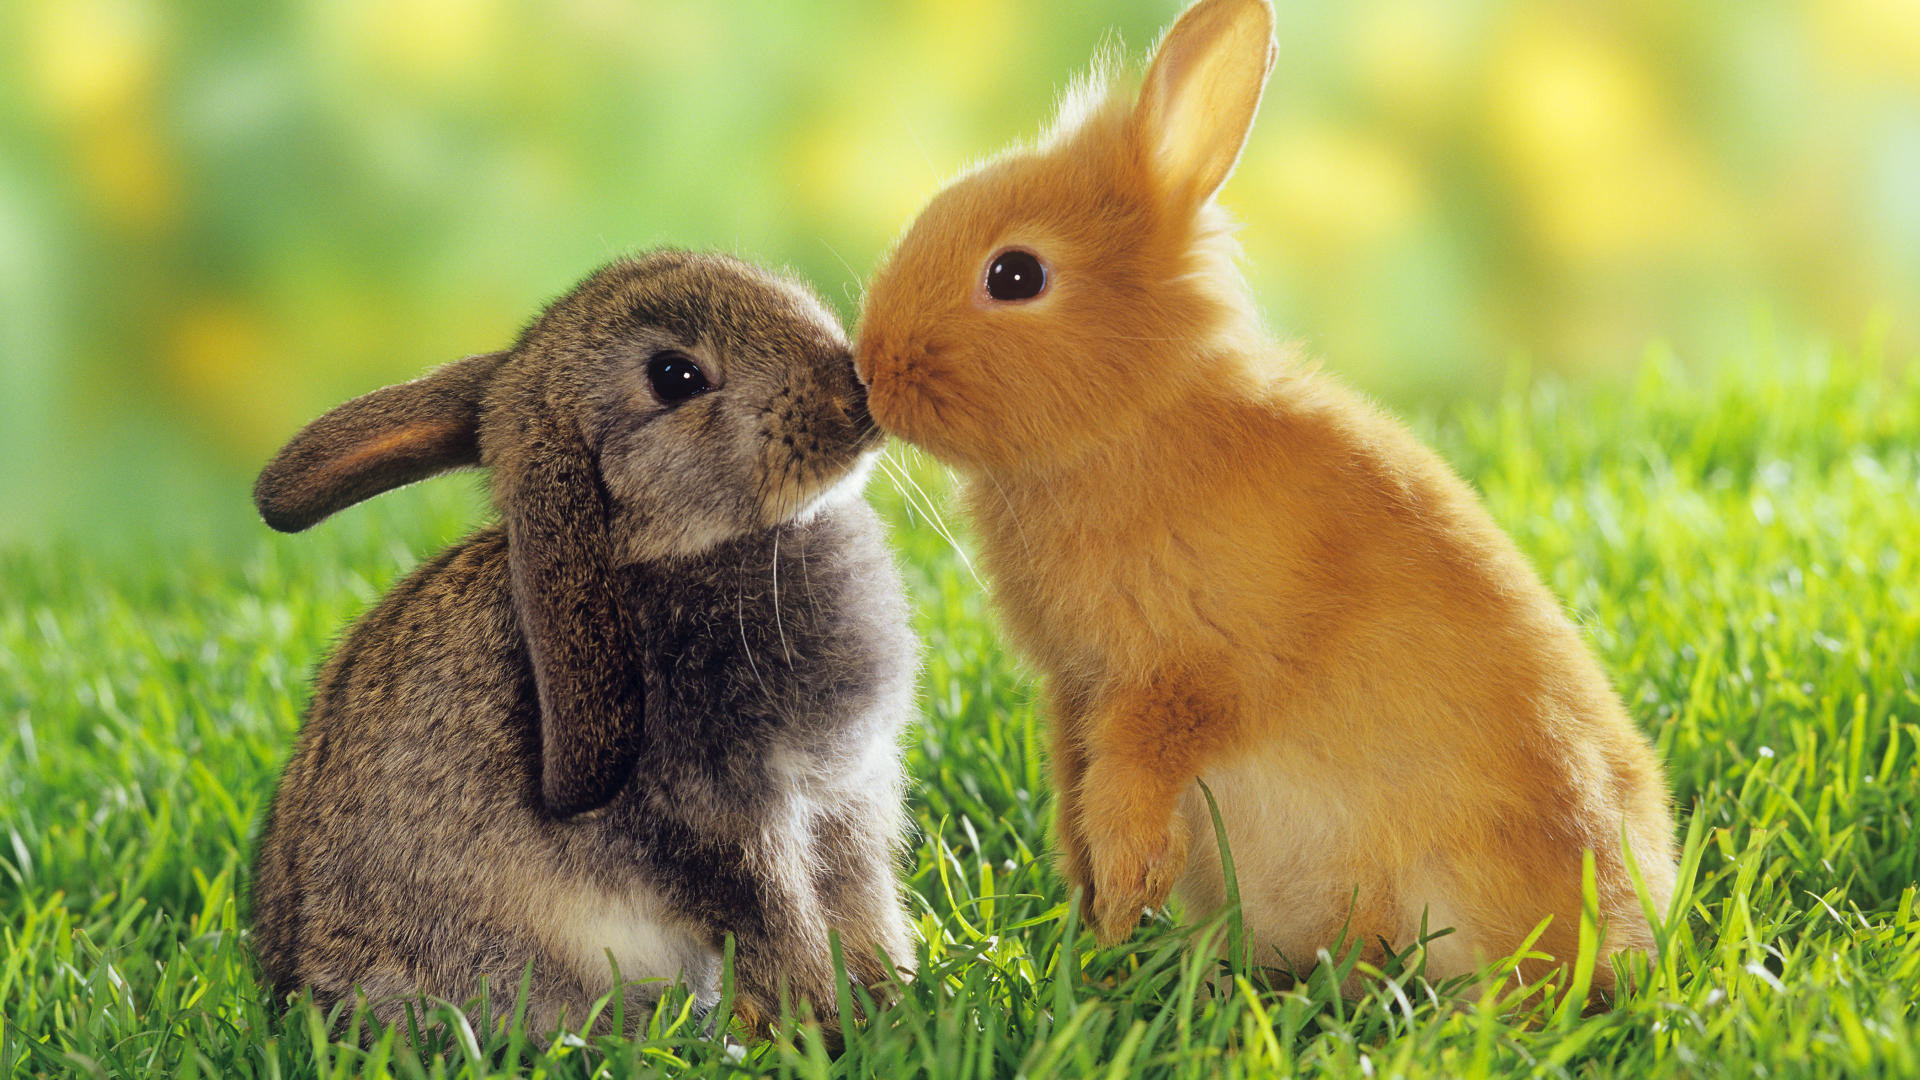 1920x1080  Cute Baby Rabbits Wallpapers. 0 Â· Download Â· Res: 2560x1600 ...